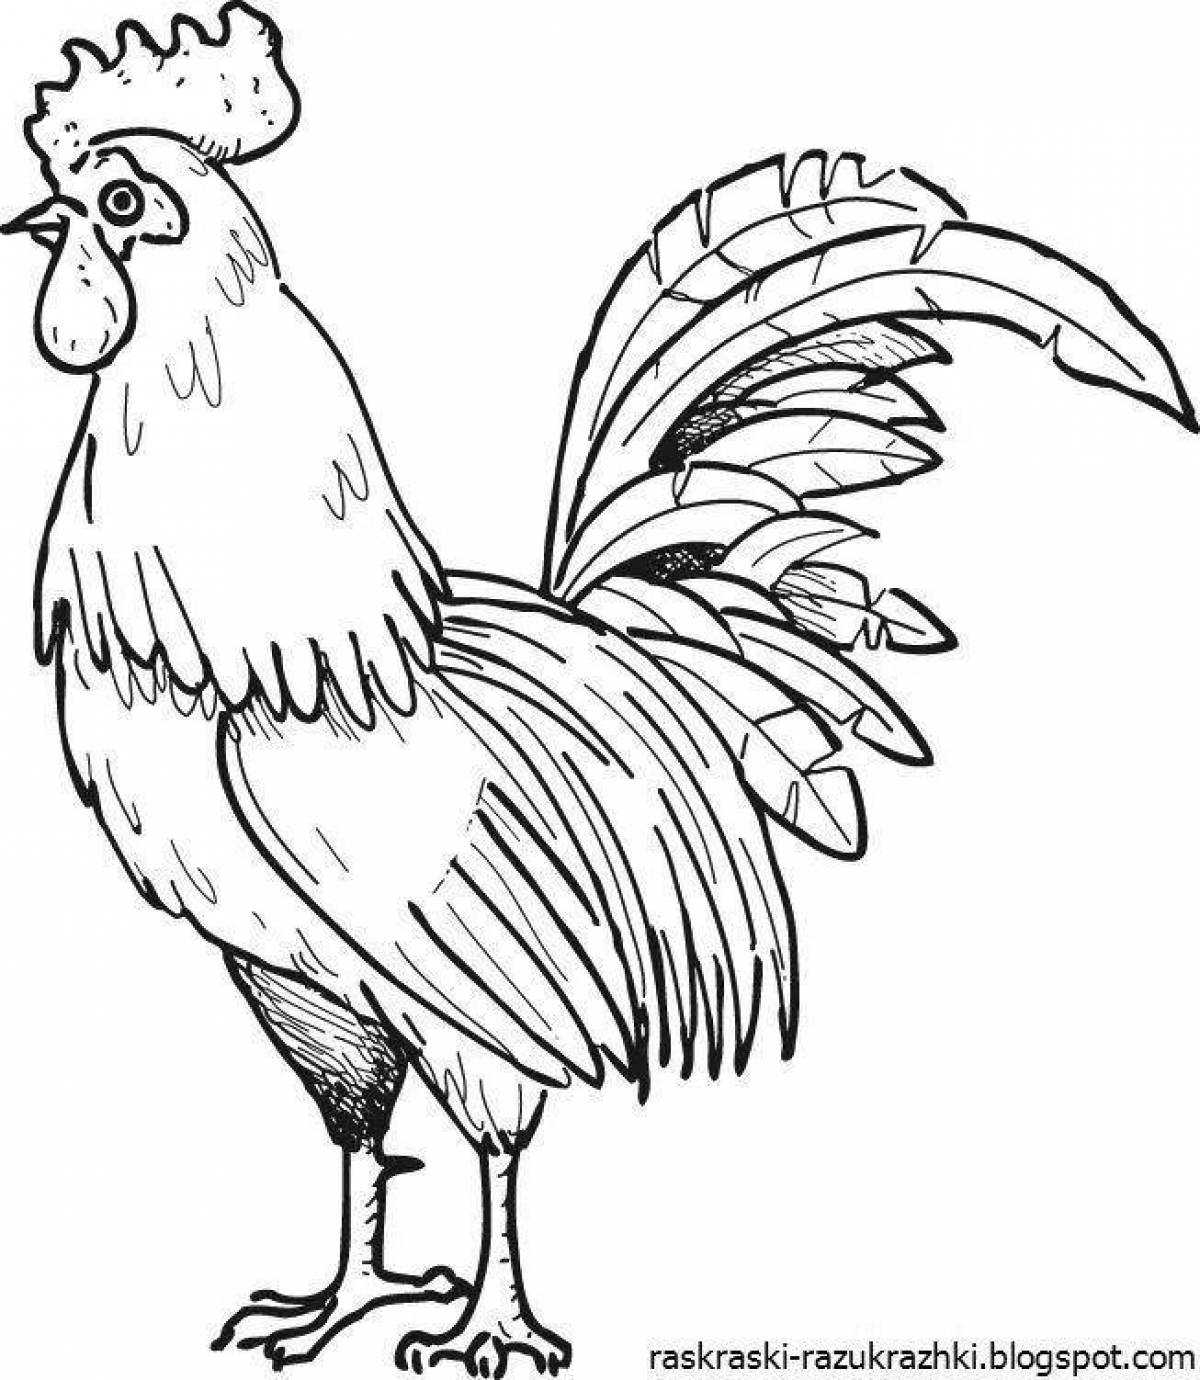 Children's colorful rooster coloring book